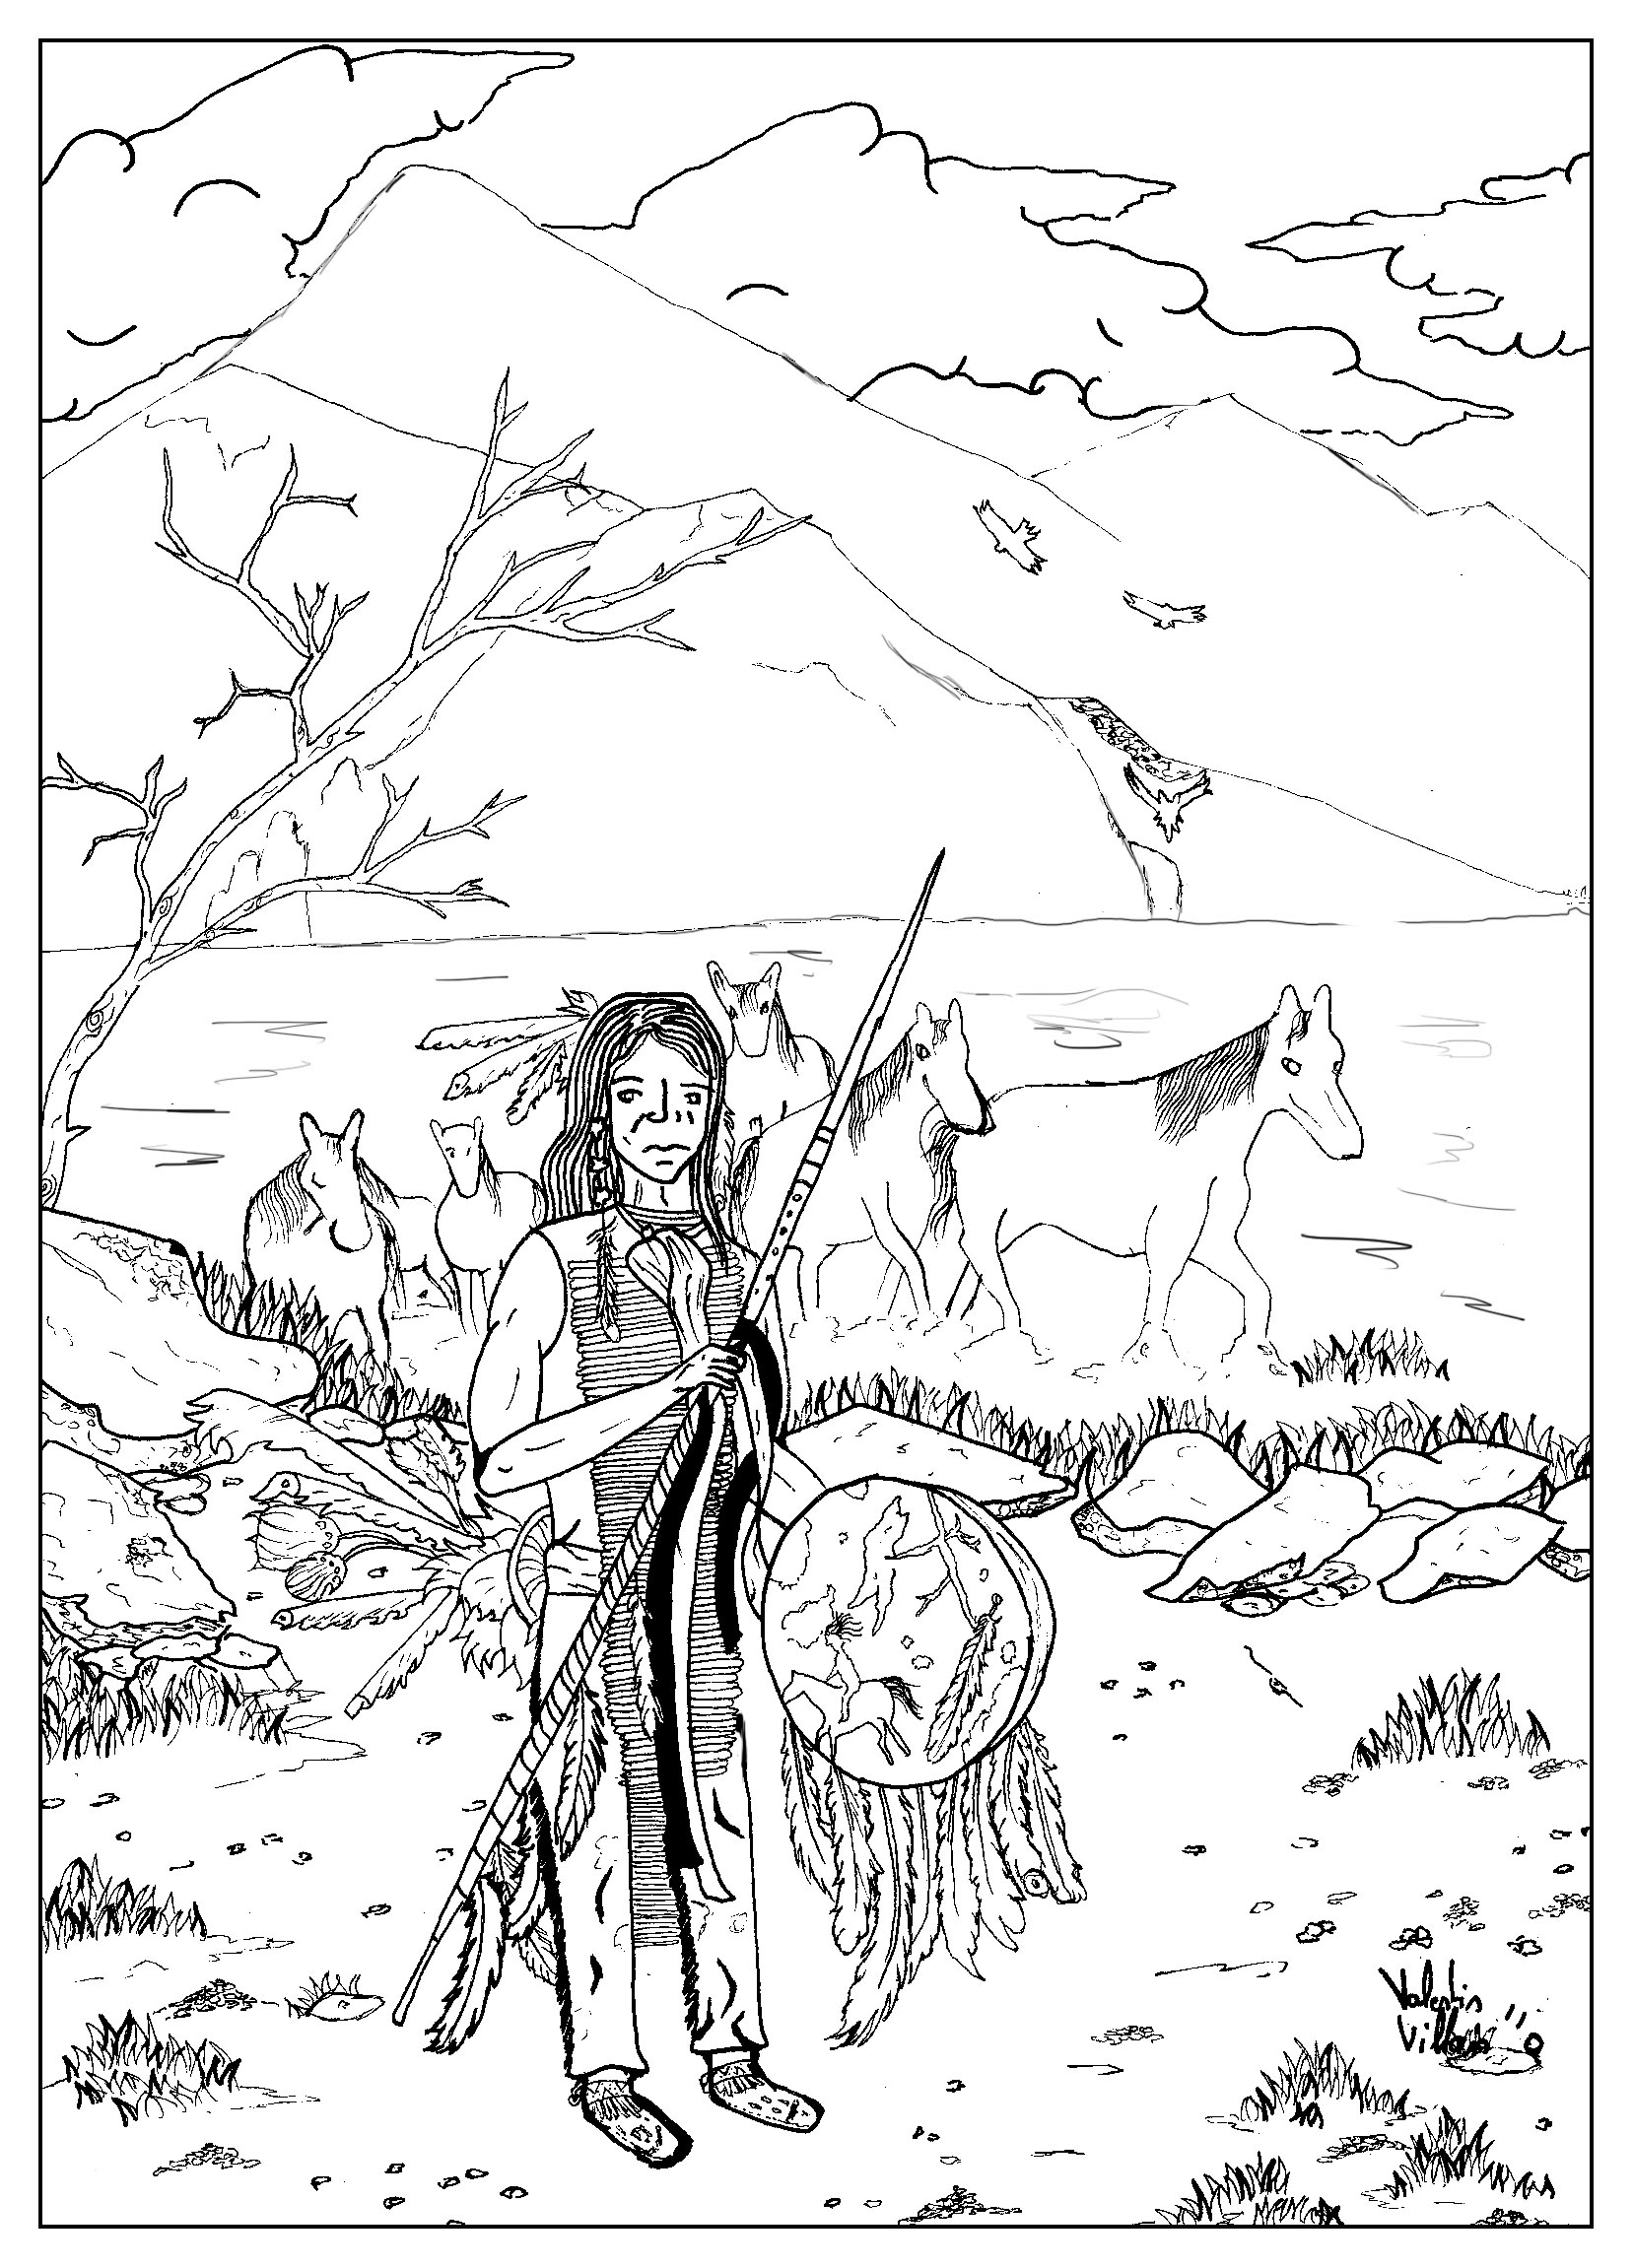 Coloring page adult draw native american by valentin